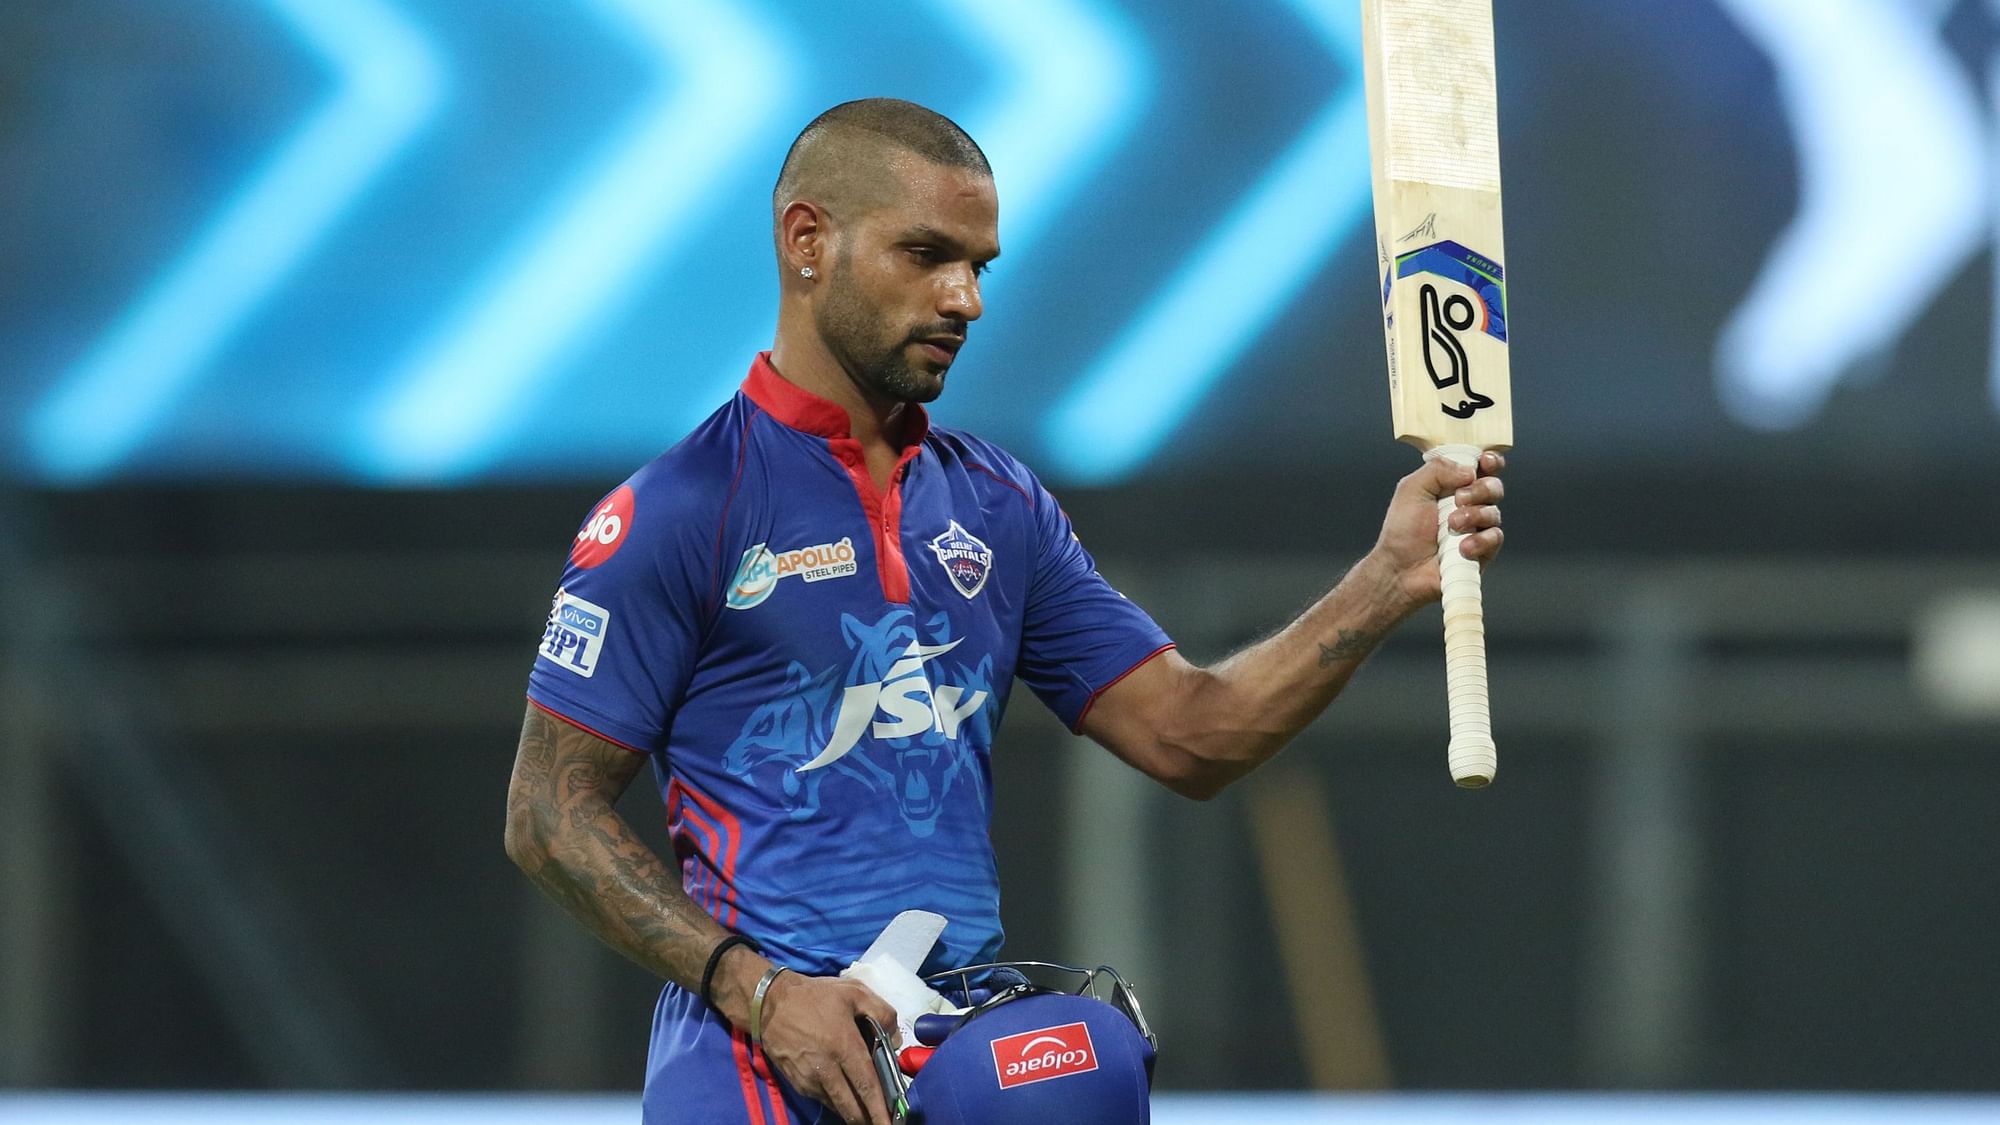 Shikhar Dhawan scored 92 as Delhi recorded their second victory of IPL 2021.